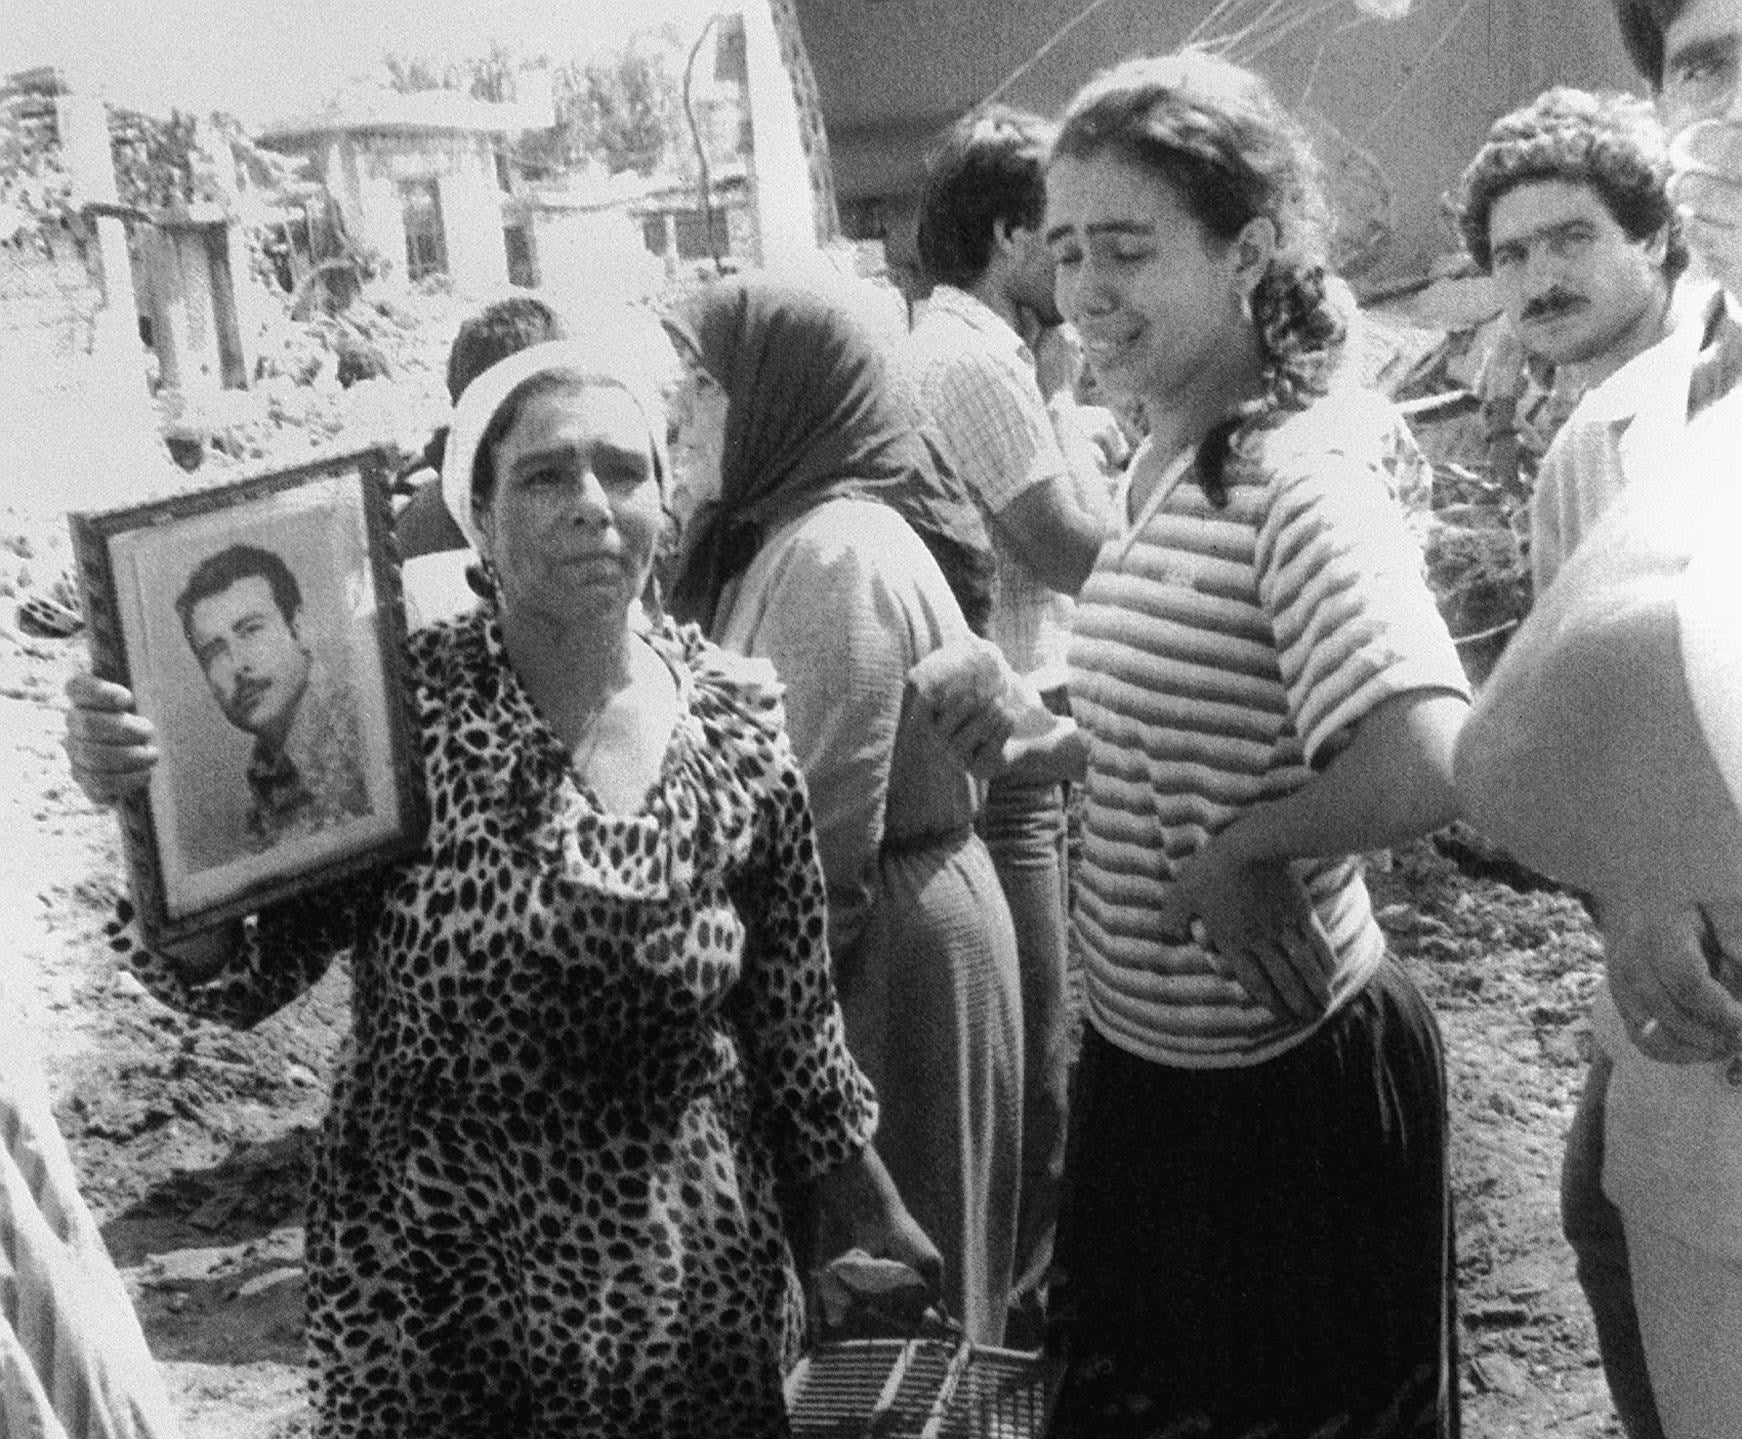 A Palestinian woman holds up a portrait of her dead husband after the massacre in Sabra in 1982